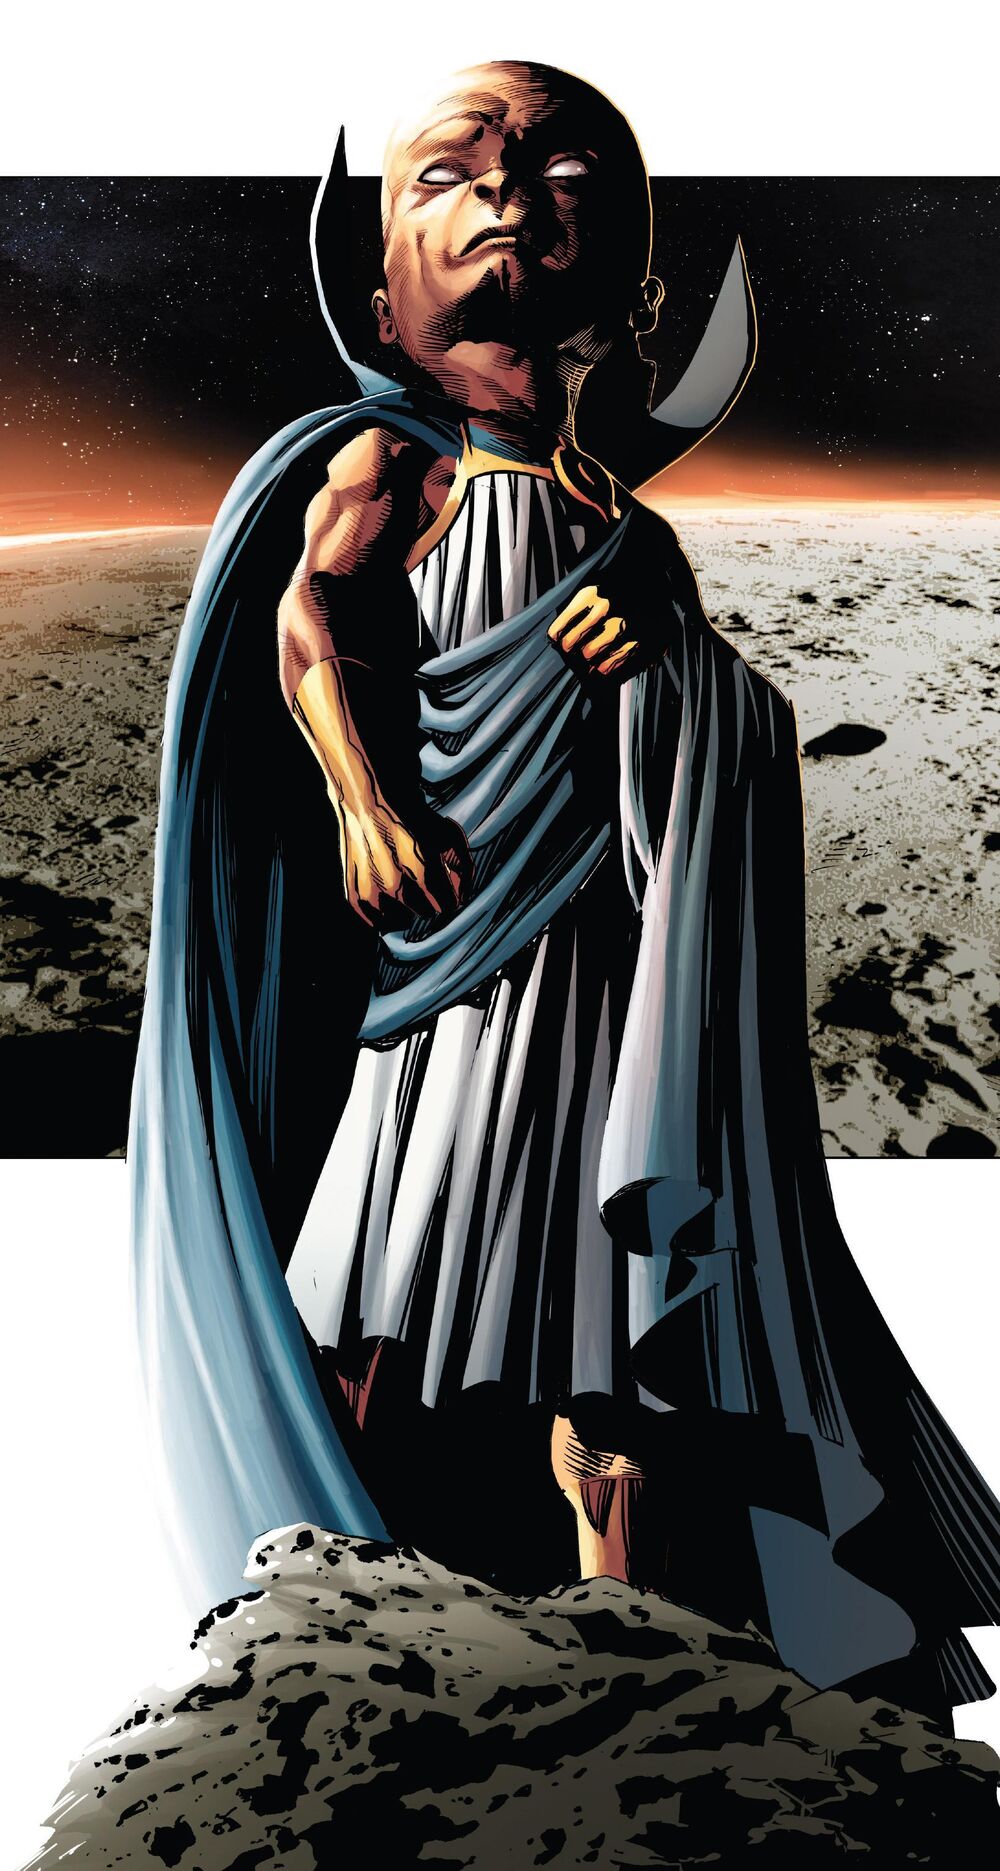 Image of the character 'Uatu the Watcher' from the Disney+ show 'What-If'...